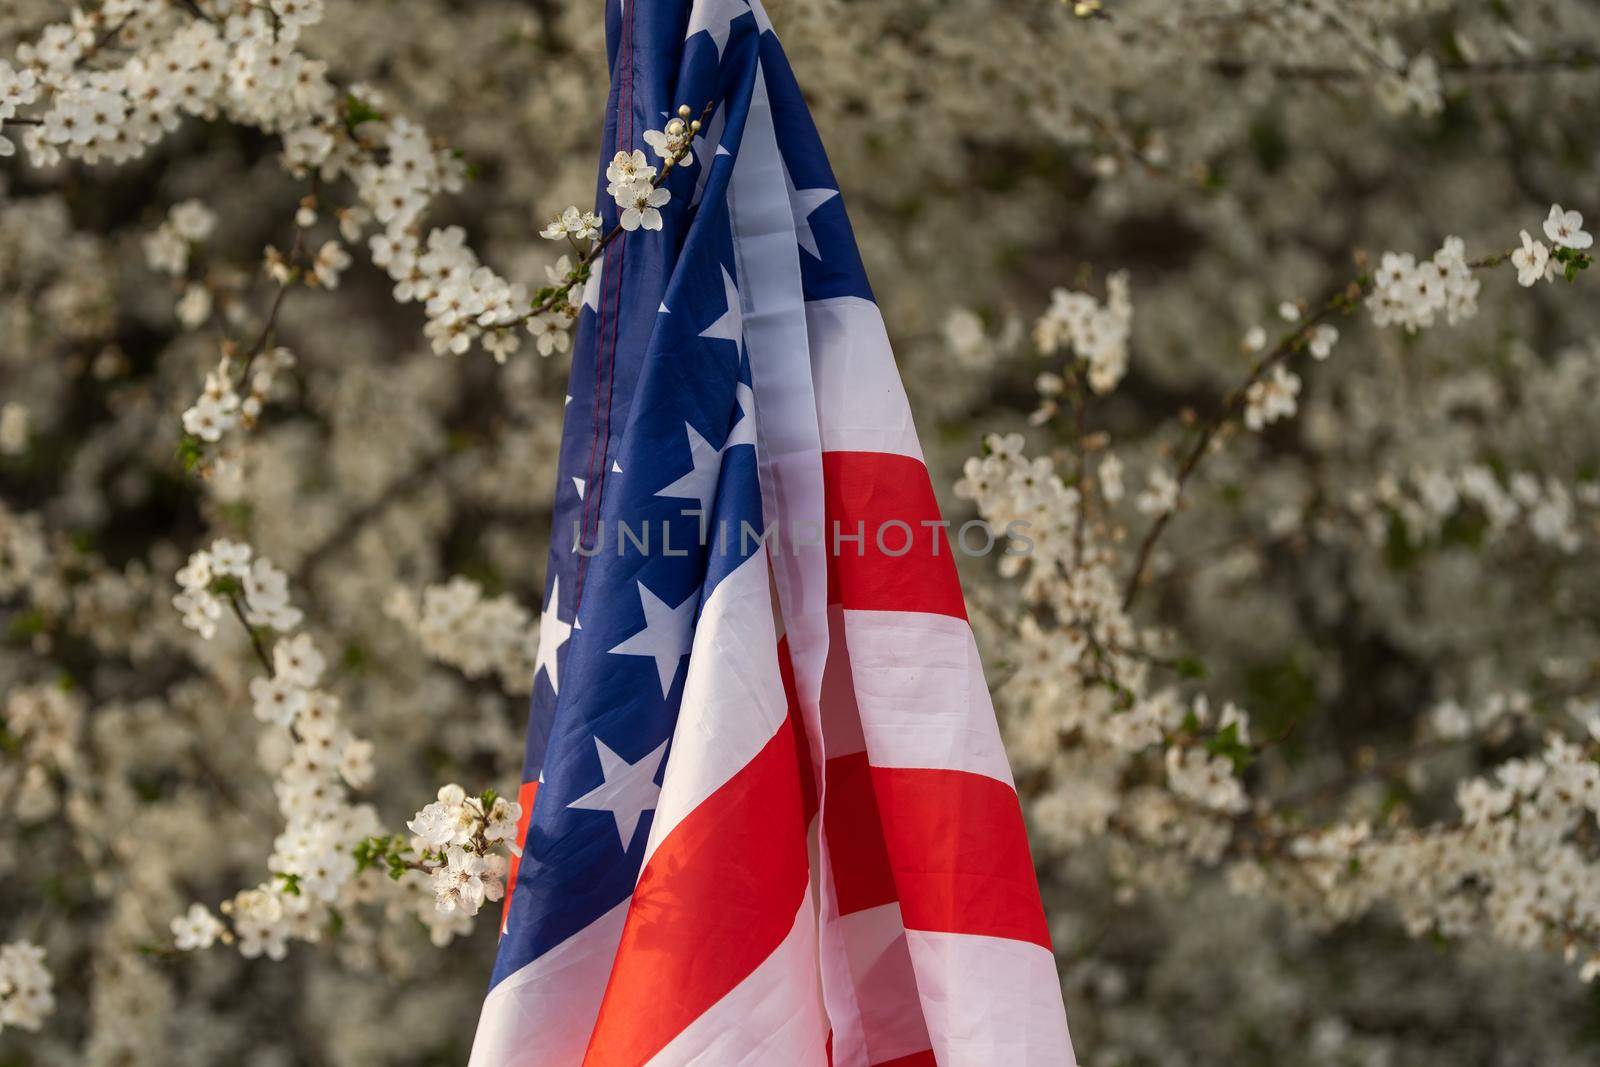 American flags in flowers on the Fourth of July by Andelov13